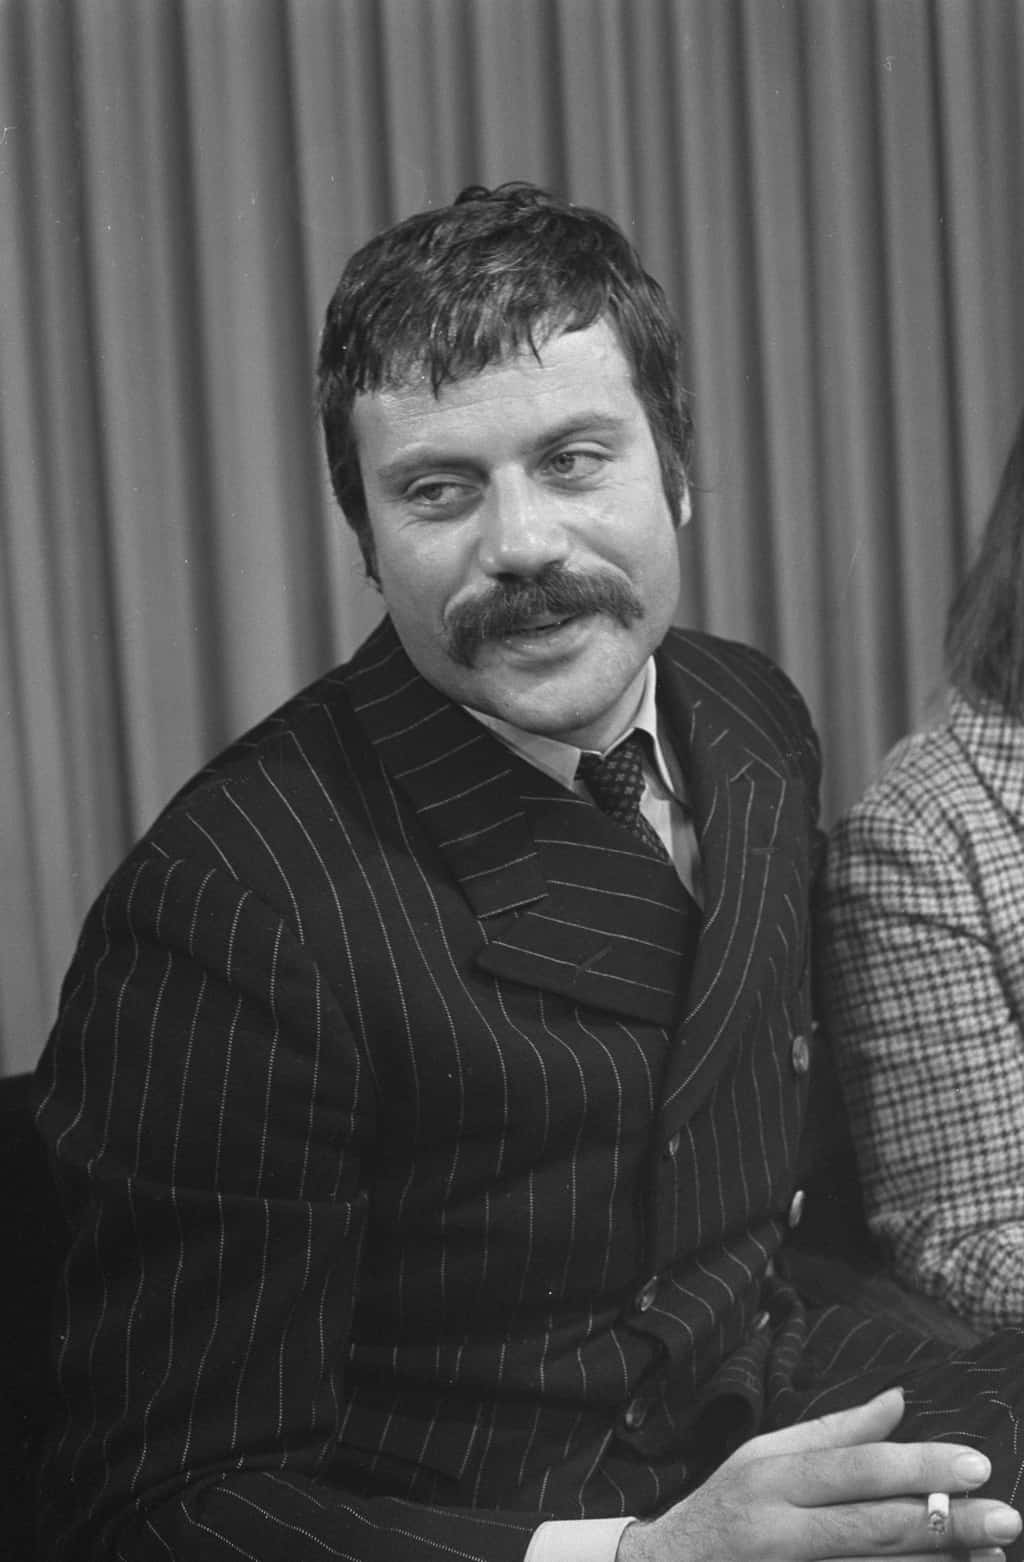 Actor, Oliver Reed, had to make a decision whether to keep his